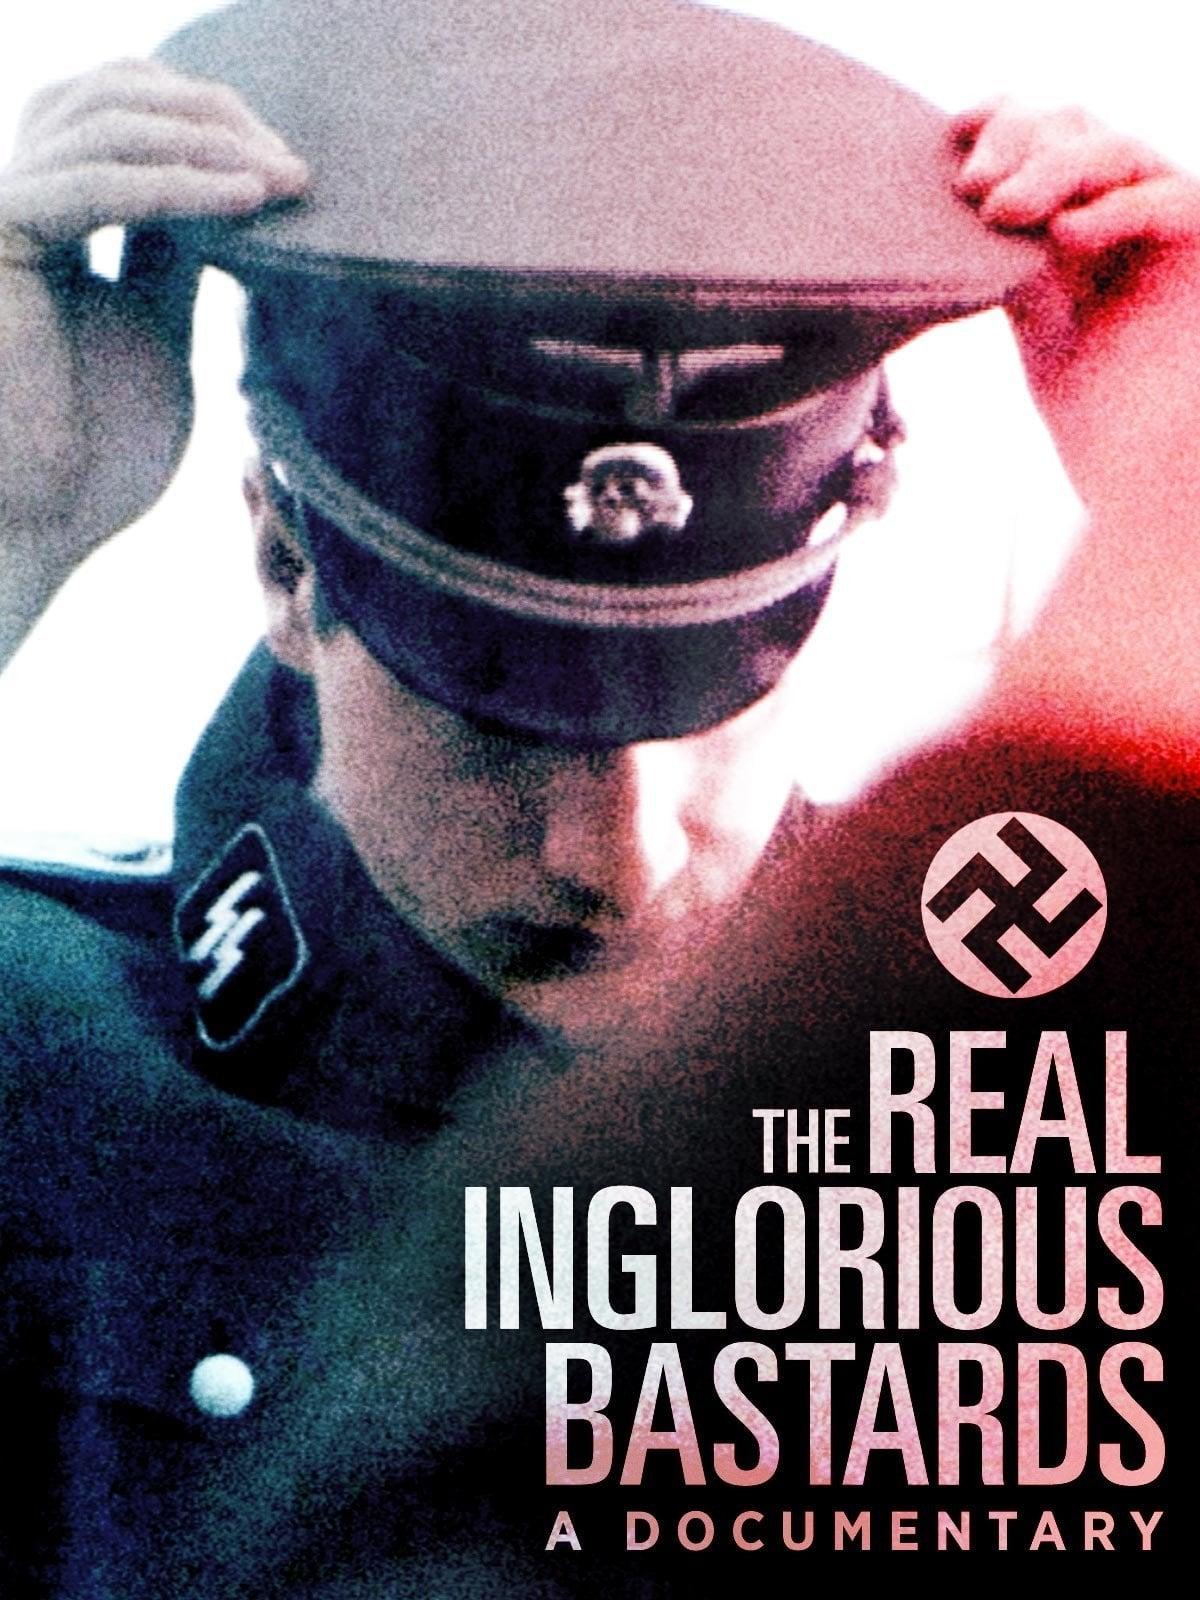 The Real Inglorious Bastards poster